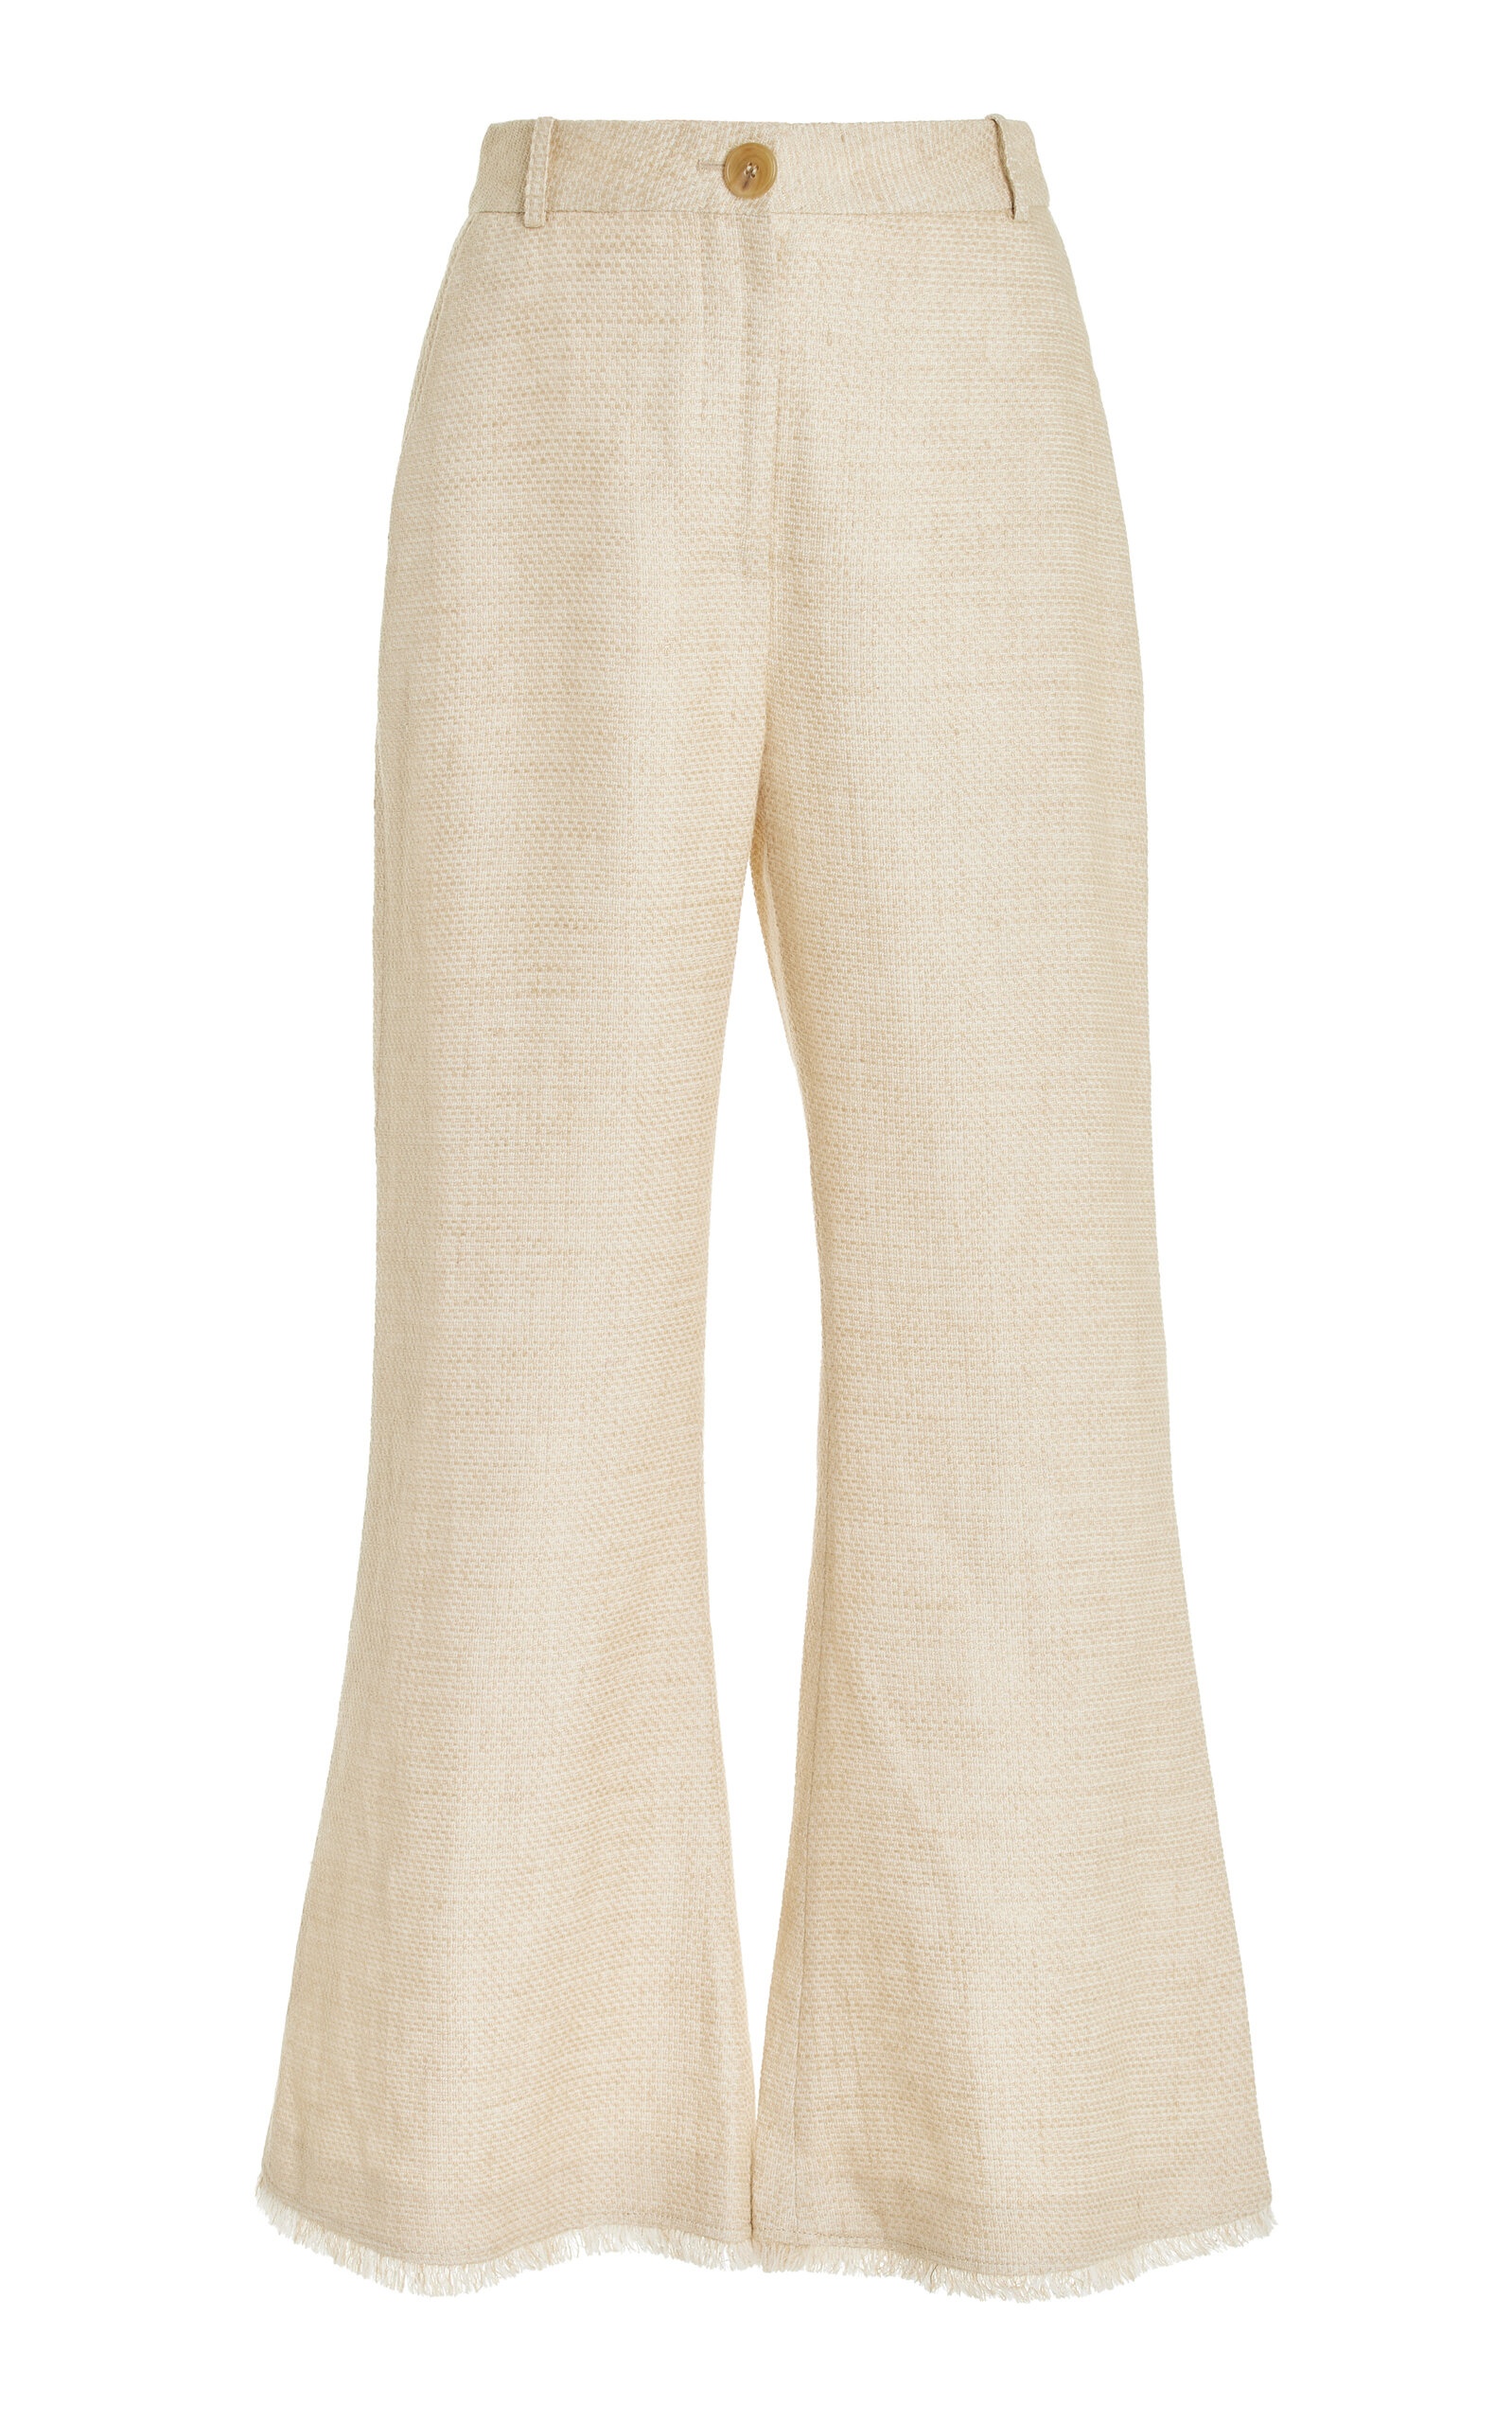 Caras Raw Edge Flared Linen-Blend Pants taupe - 1